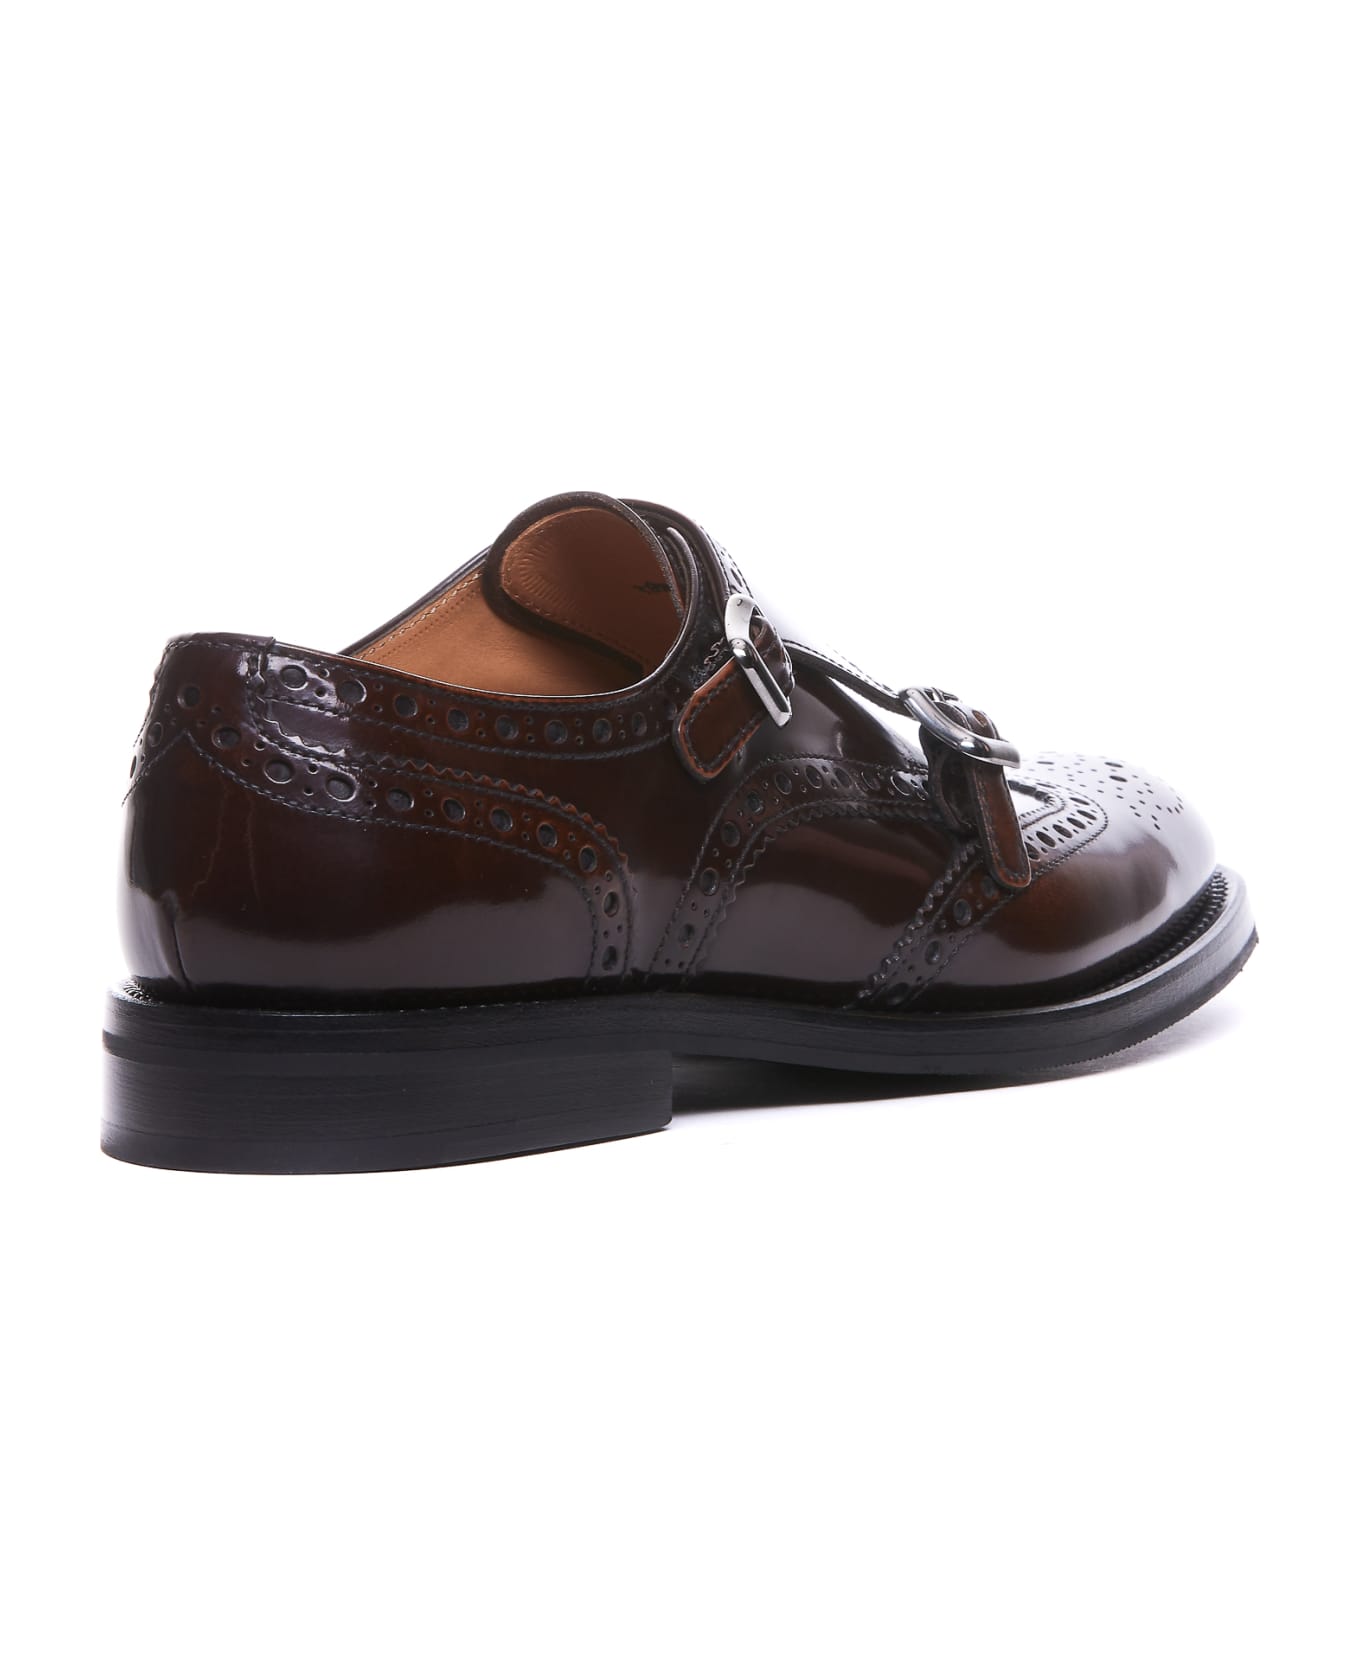 Church's Lace Up Shoes - Brown